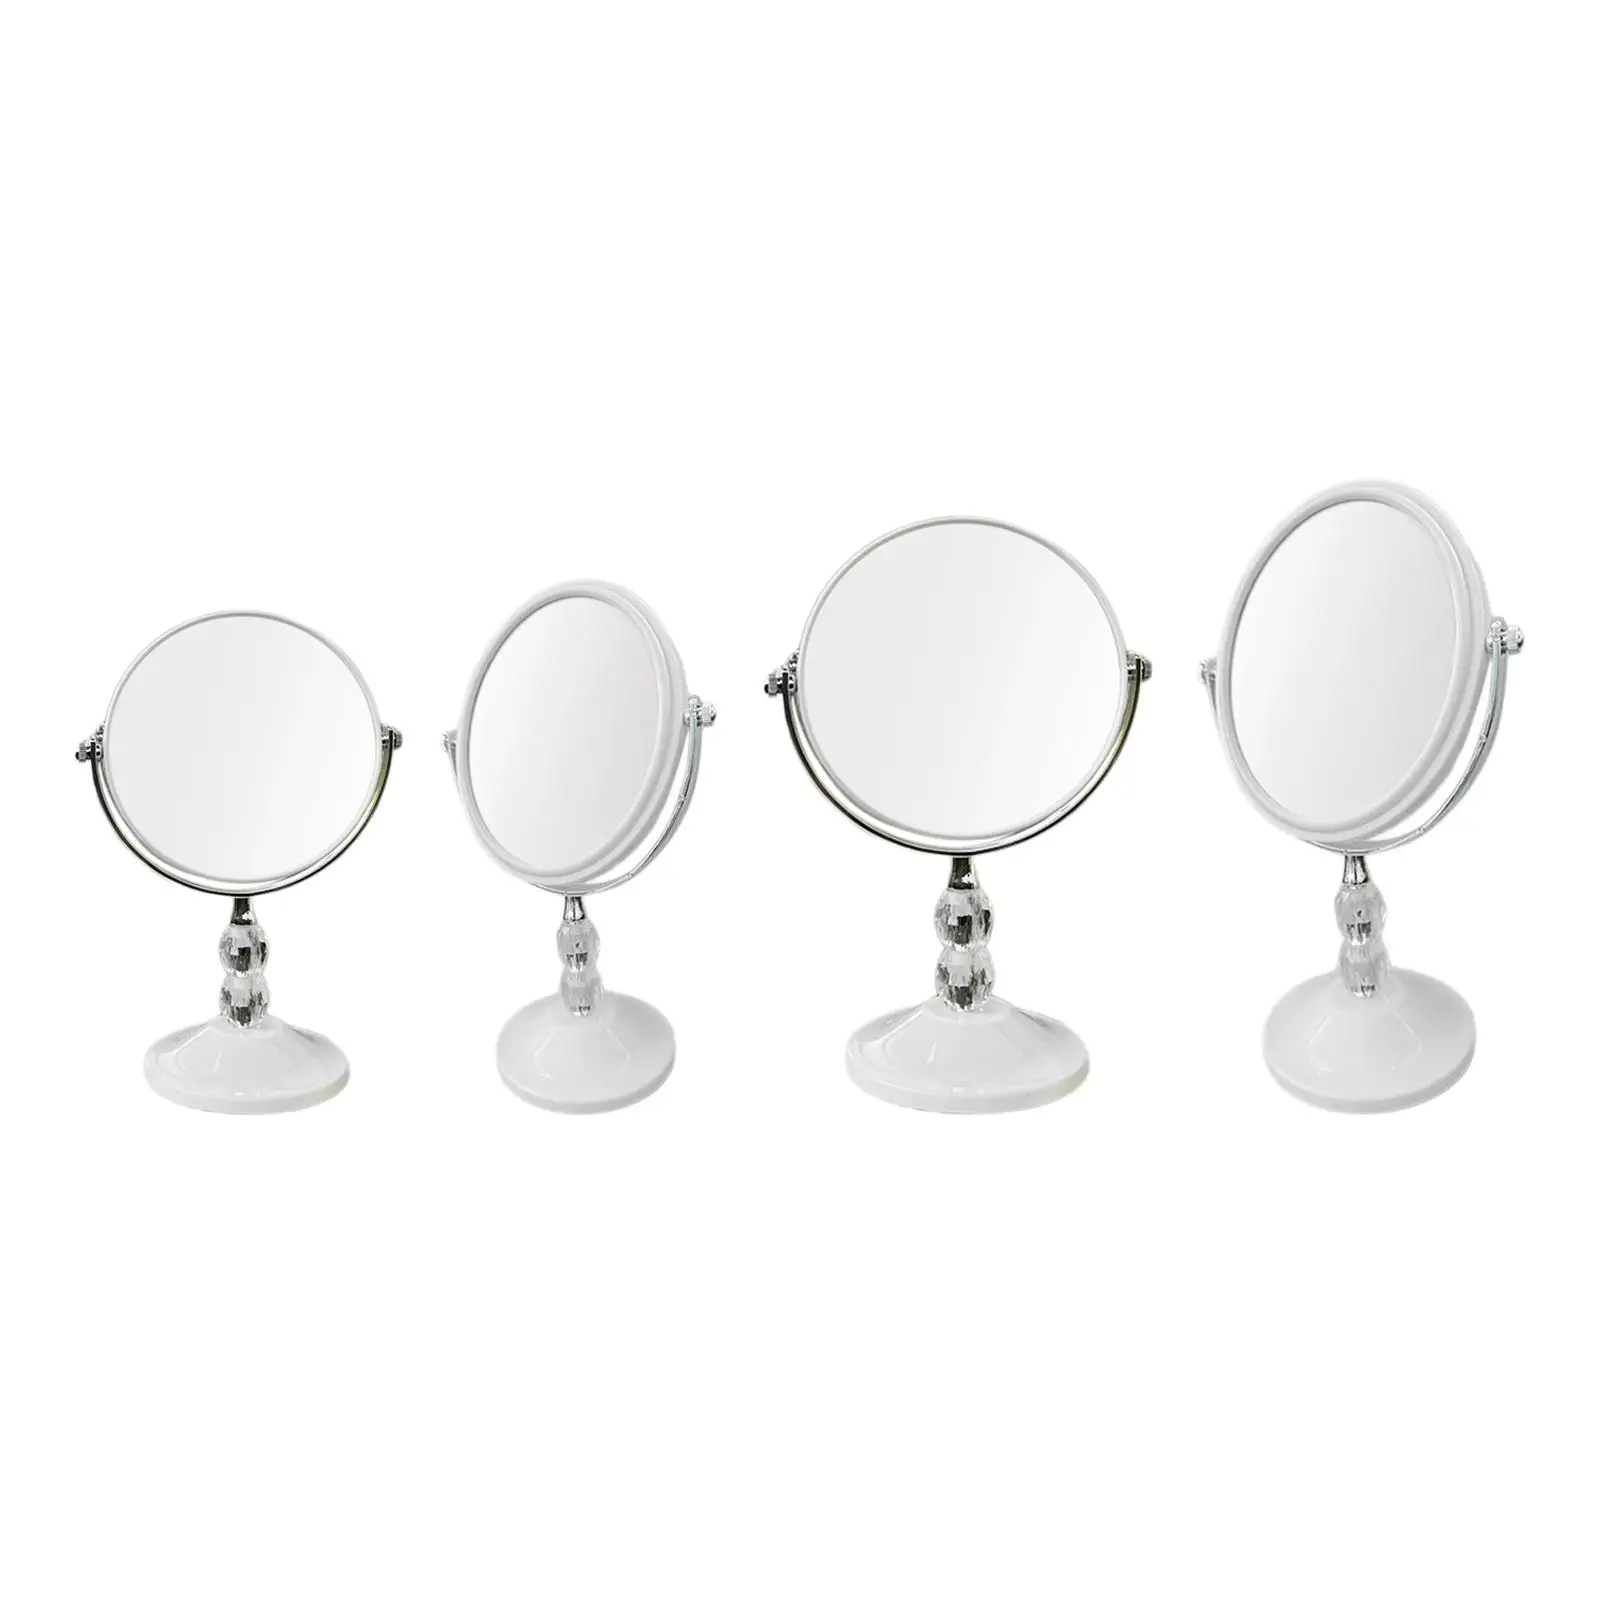 Personal Mirror Table Desk Mirror Decoration Tabletop Mirror Cosmetic Mirror for Bedroom Dressers Living Room Apartment Women